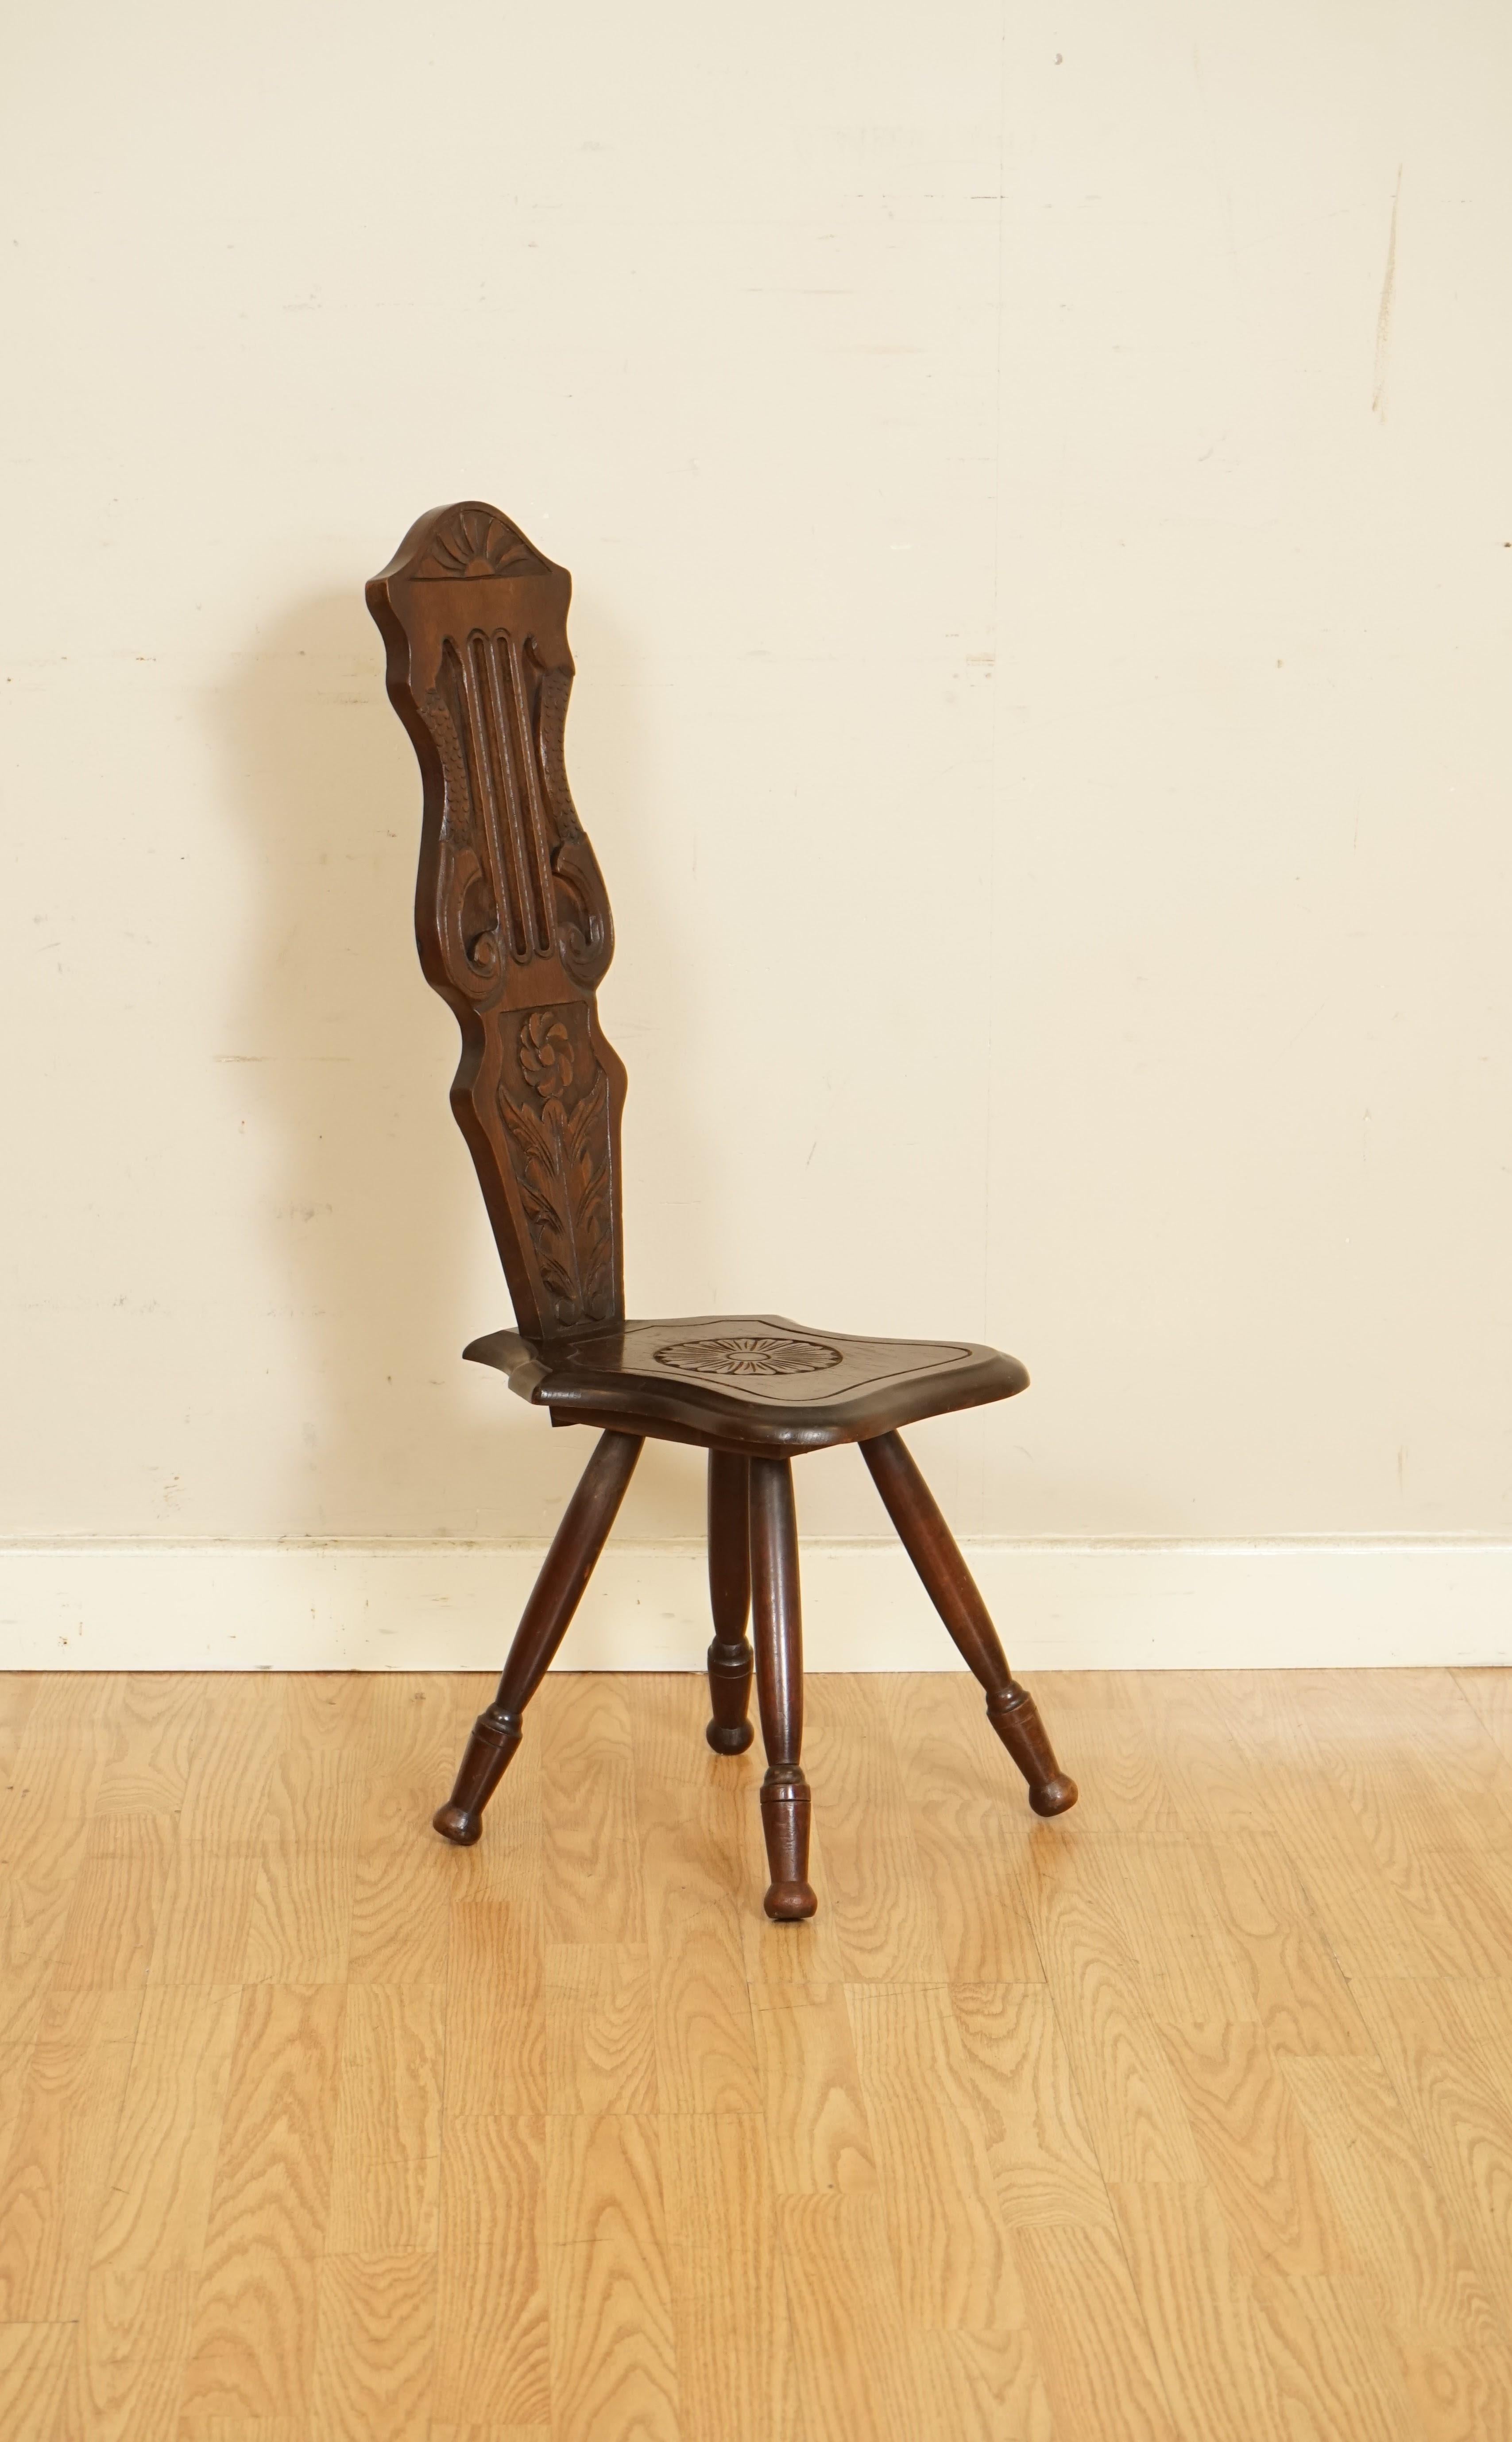 We are so excited to present to you this very decorative carved welsh spinning chair.

We have lightly restored this by giving it a hand clean all over, hand waxed and hand polish. 

Please carefully look at the pictures to see the condition